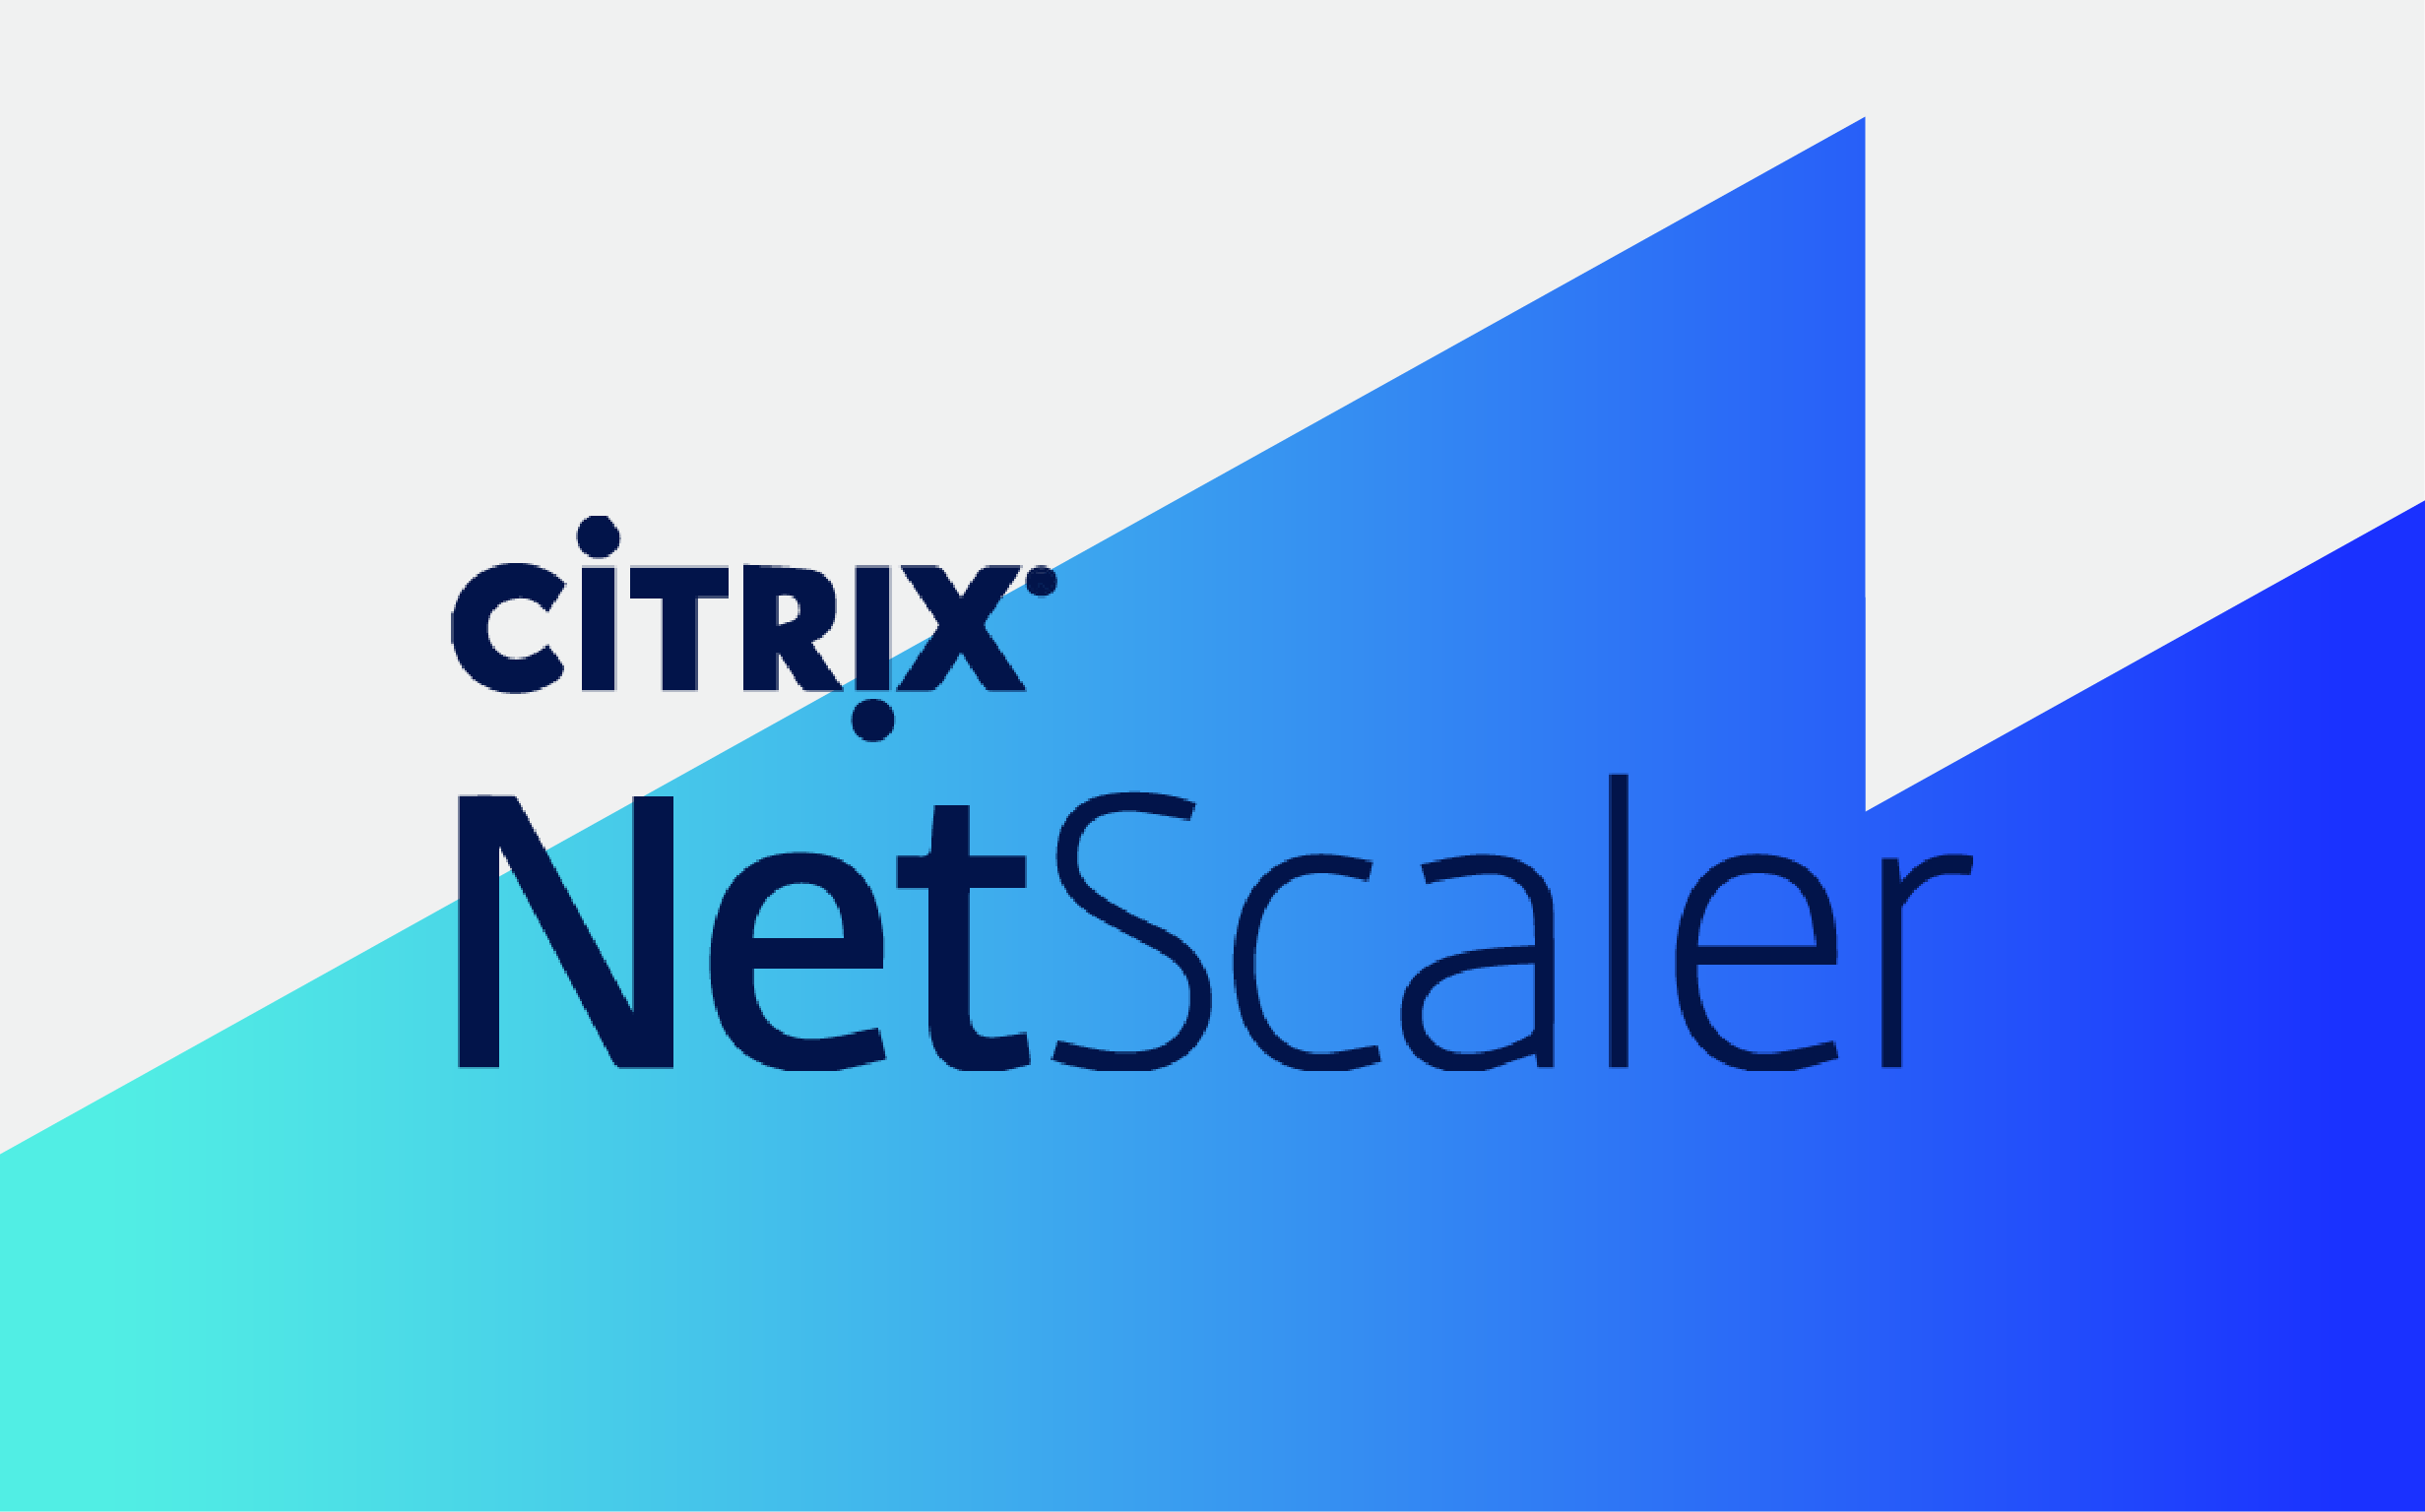 What is Citrix NetScaler, and how does it work?